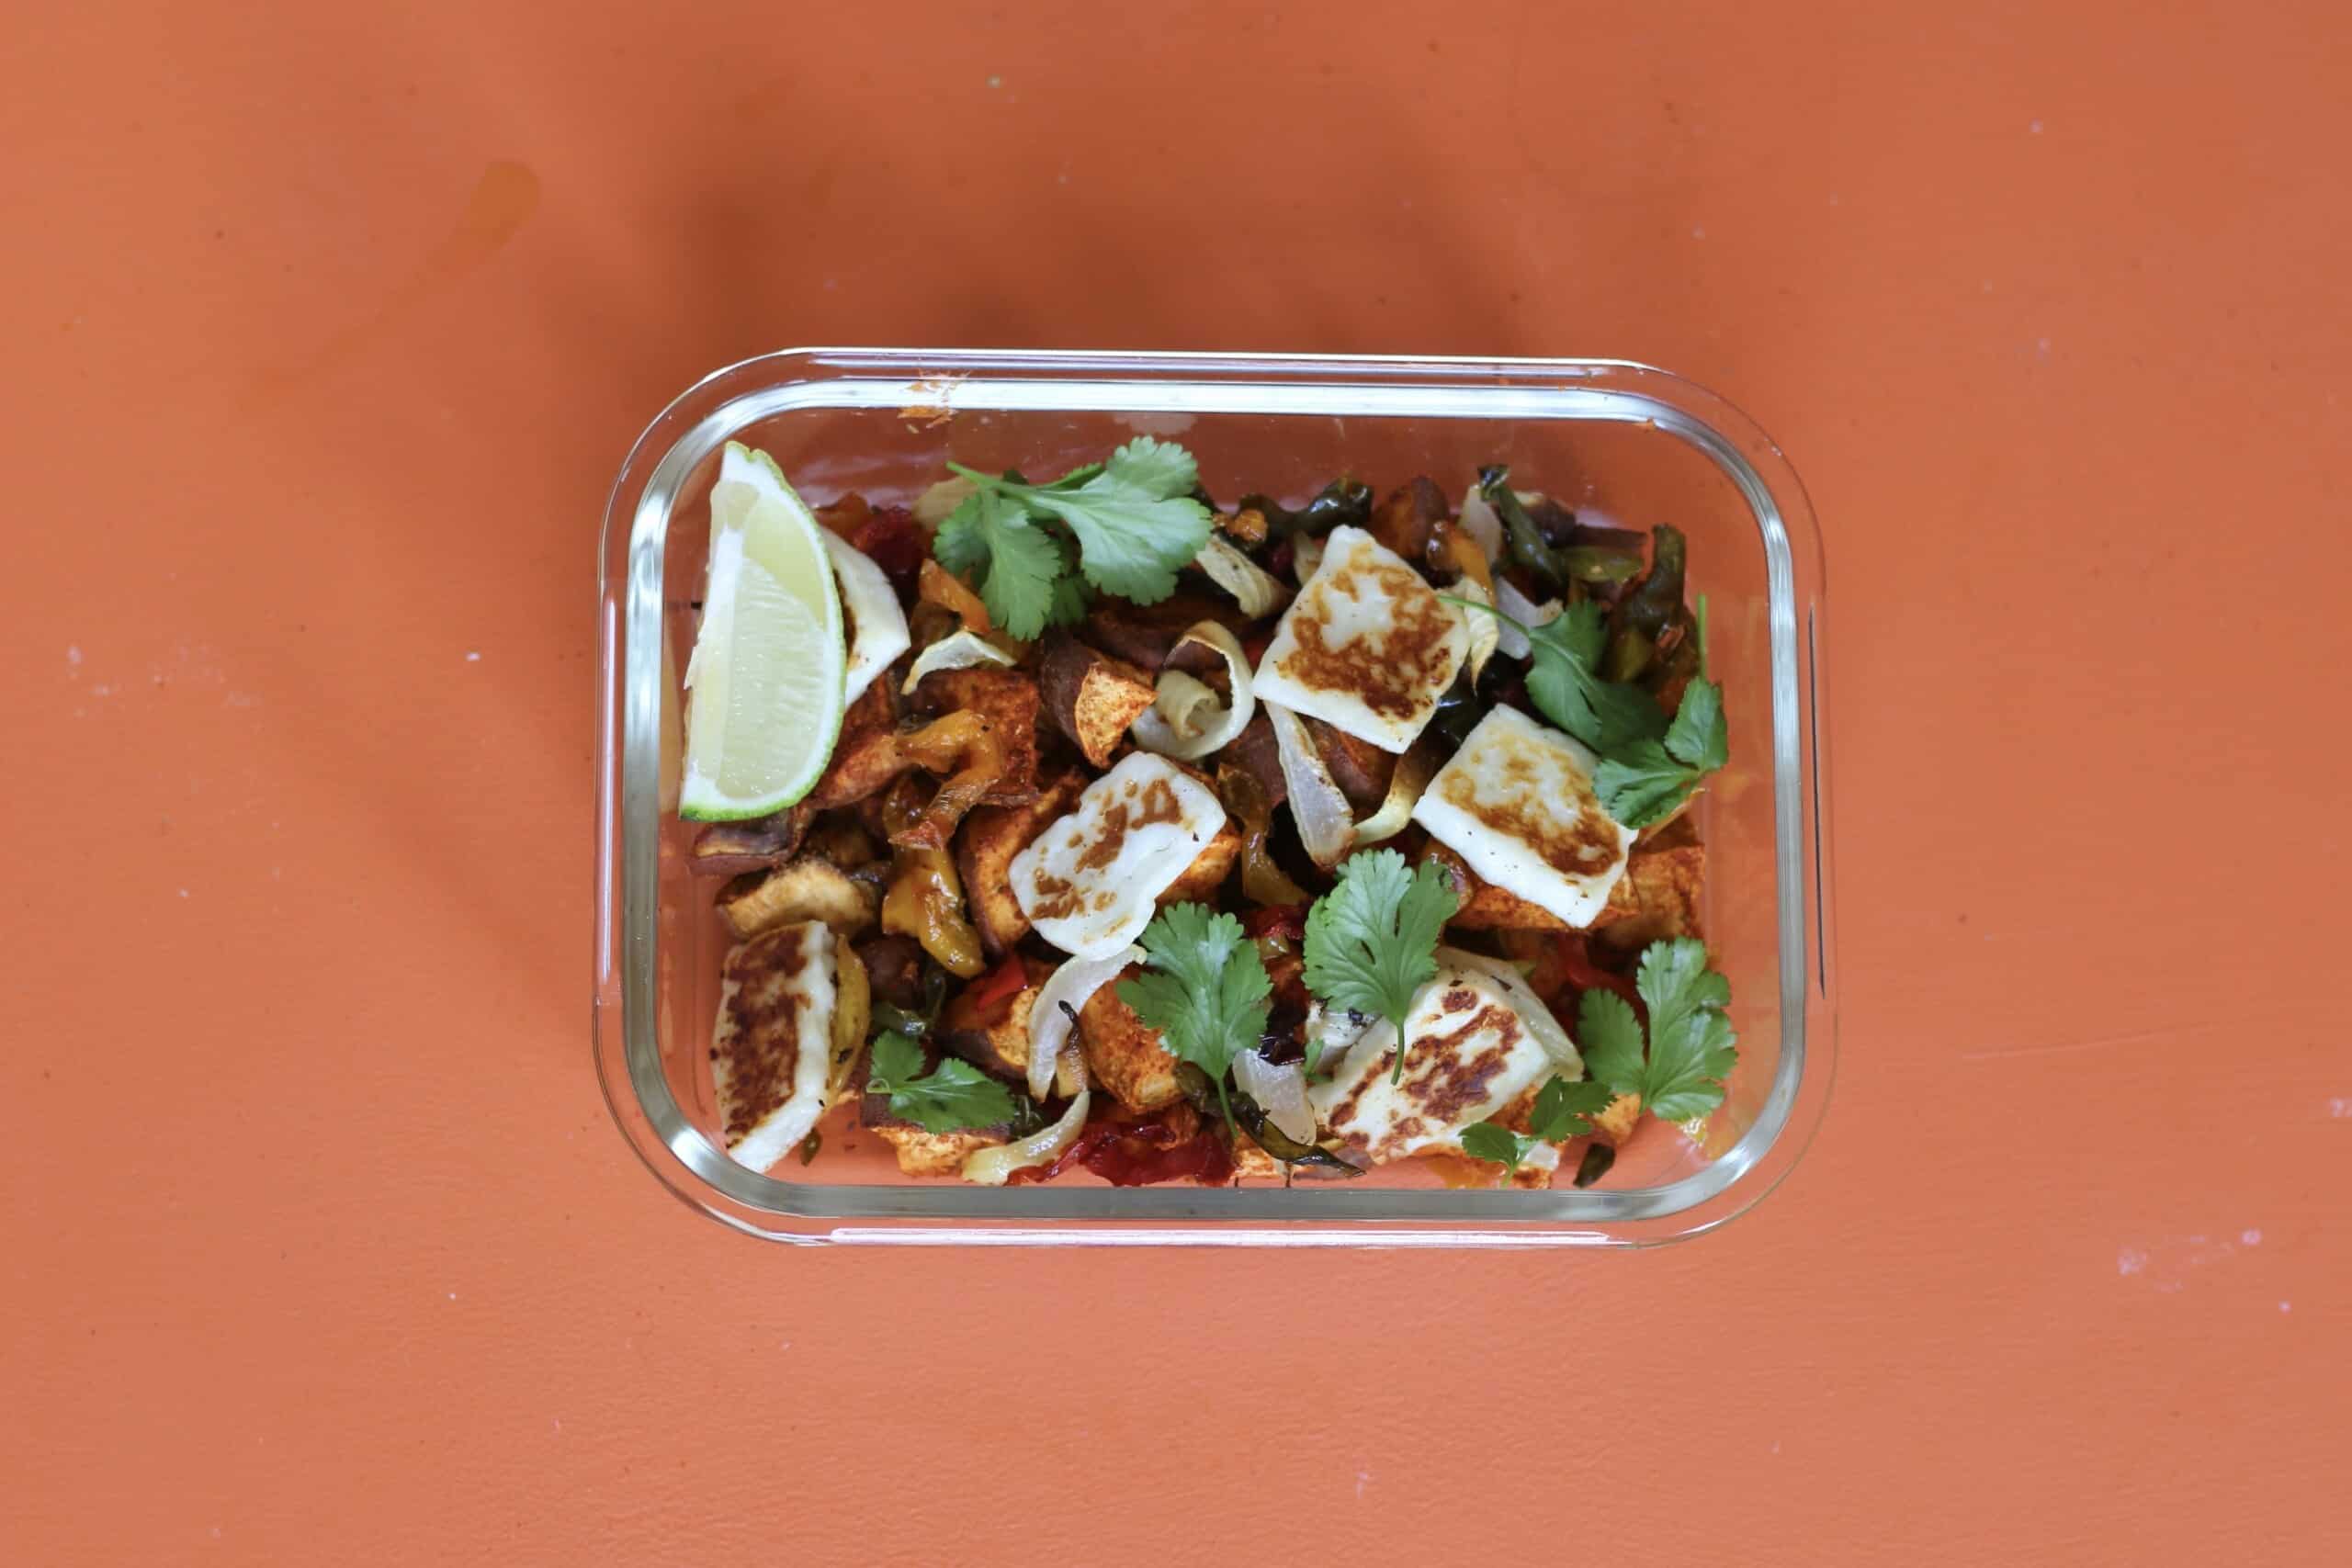 Tex Mex sweet potatoes and halloumi with coriander and a lime wedge in a glass rectangular meal prep container on an orange background.